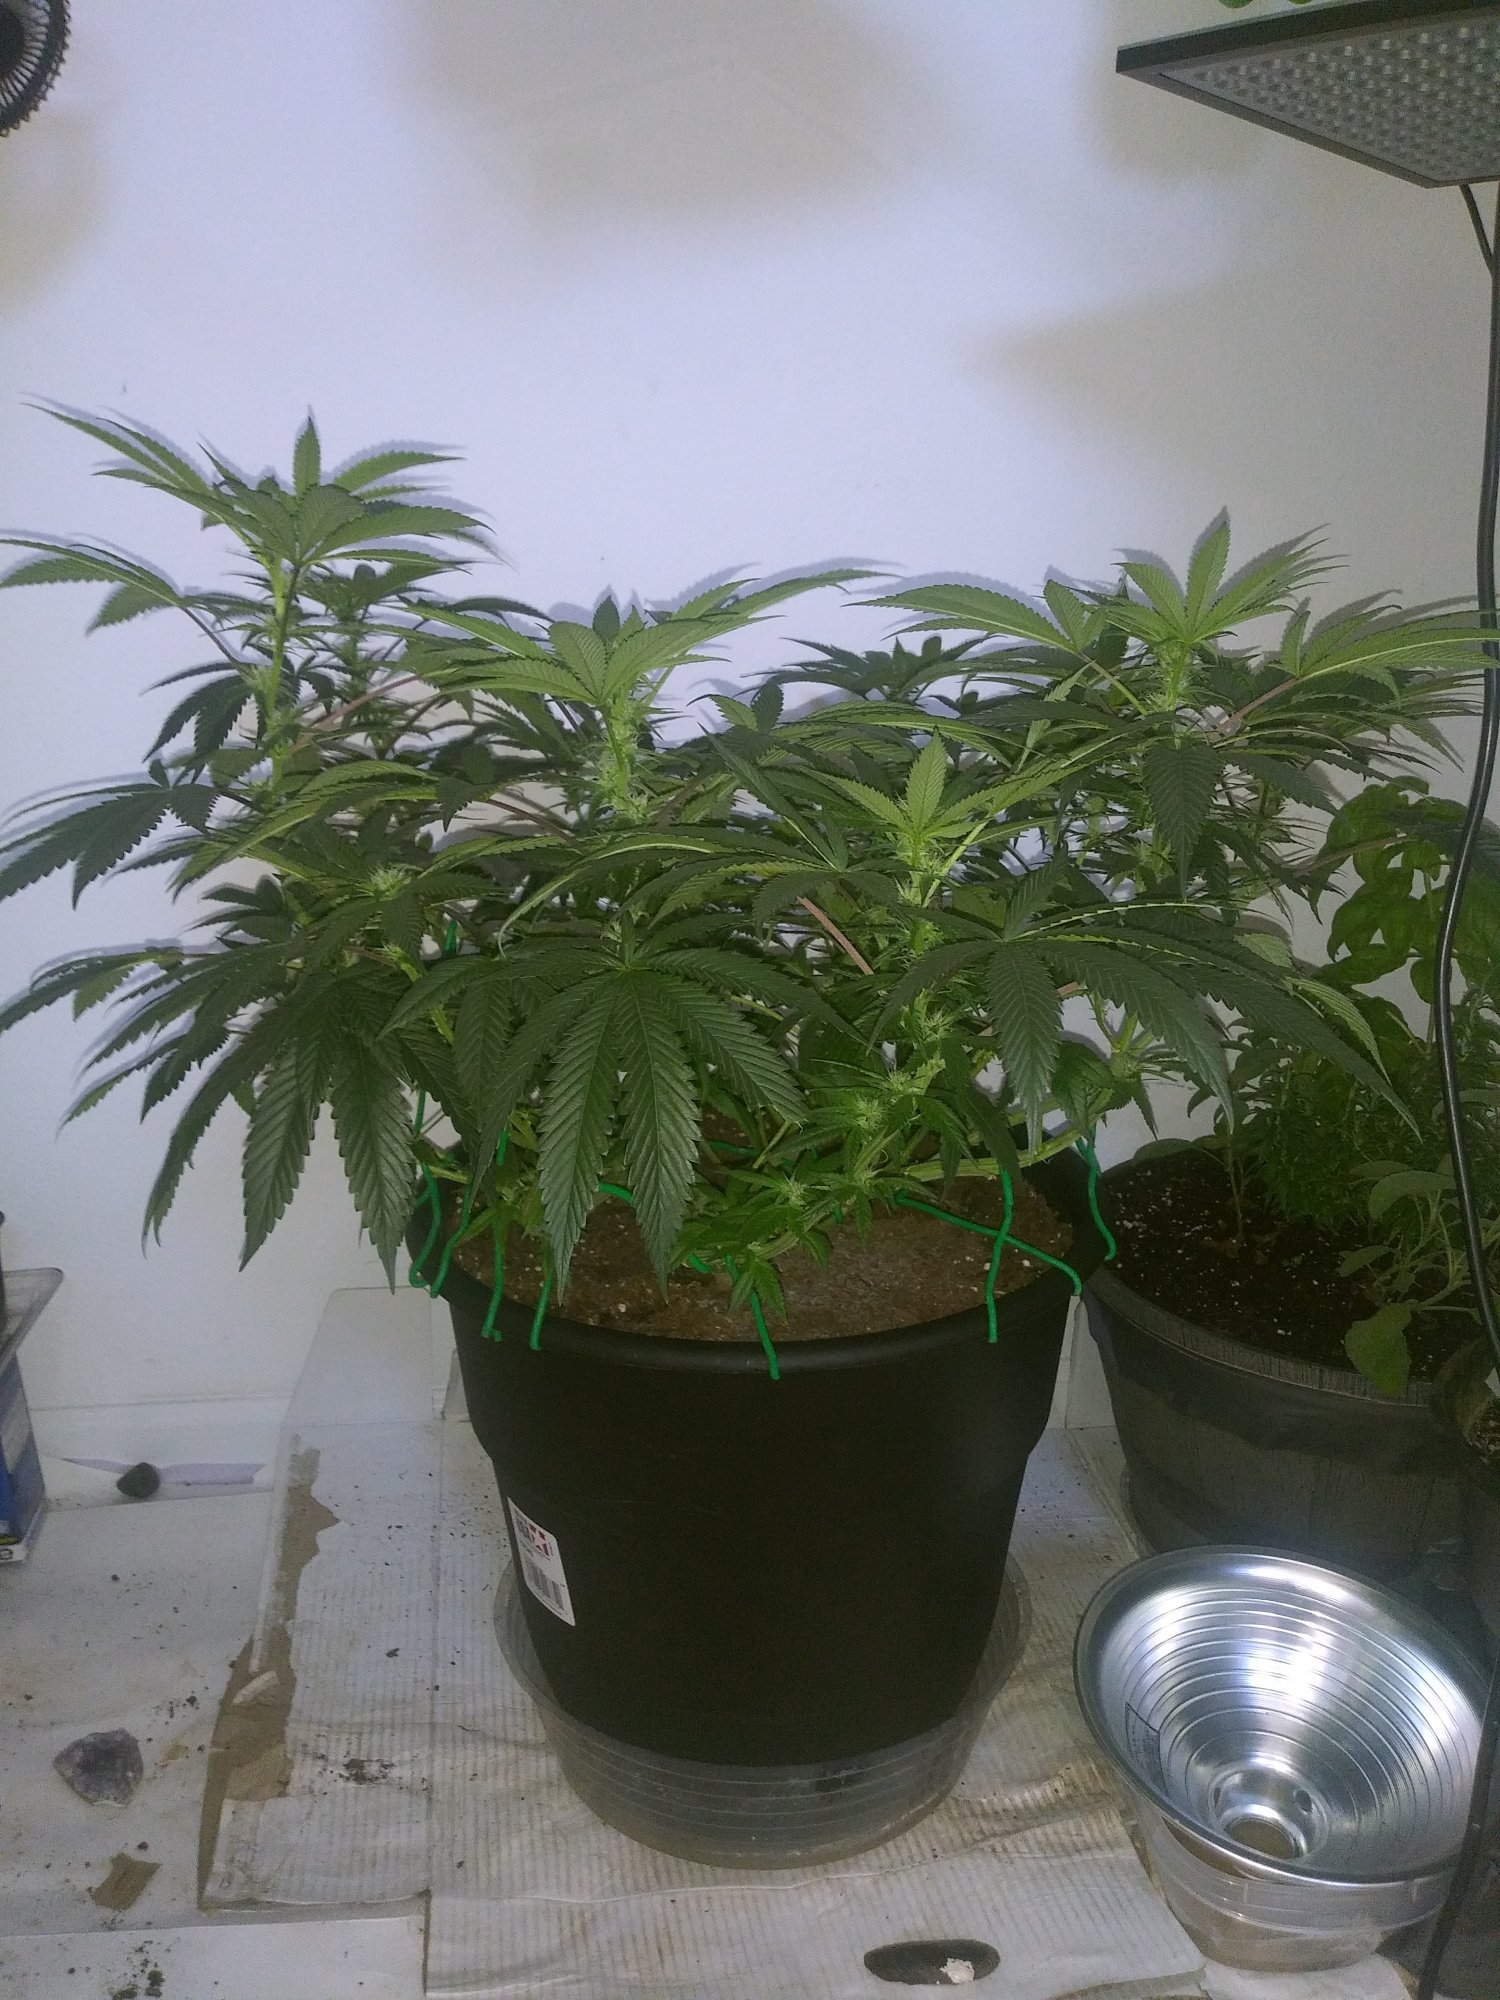 Coming to the end of week 4 flowershould i trim leaves 2